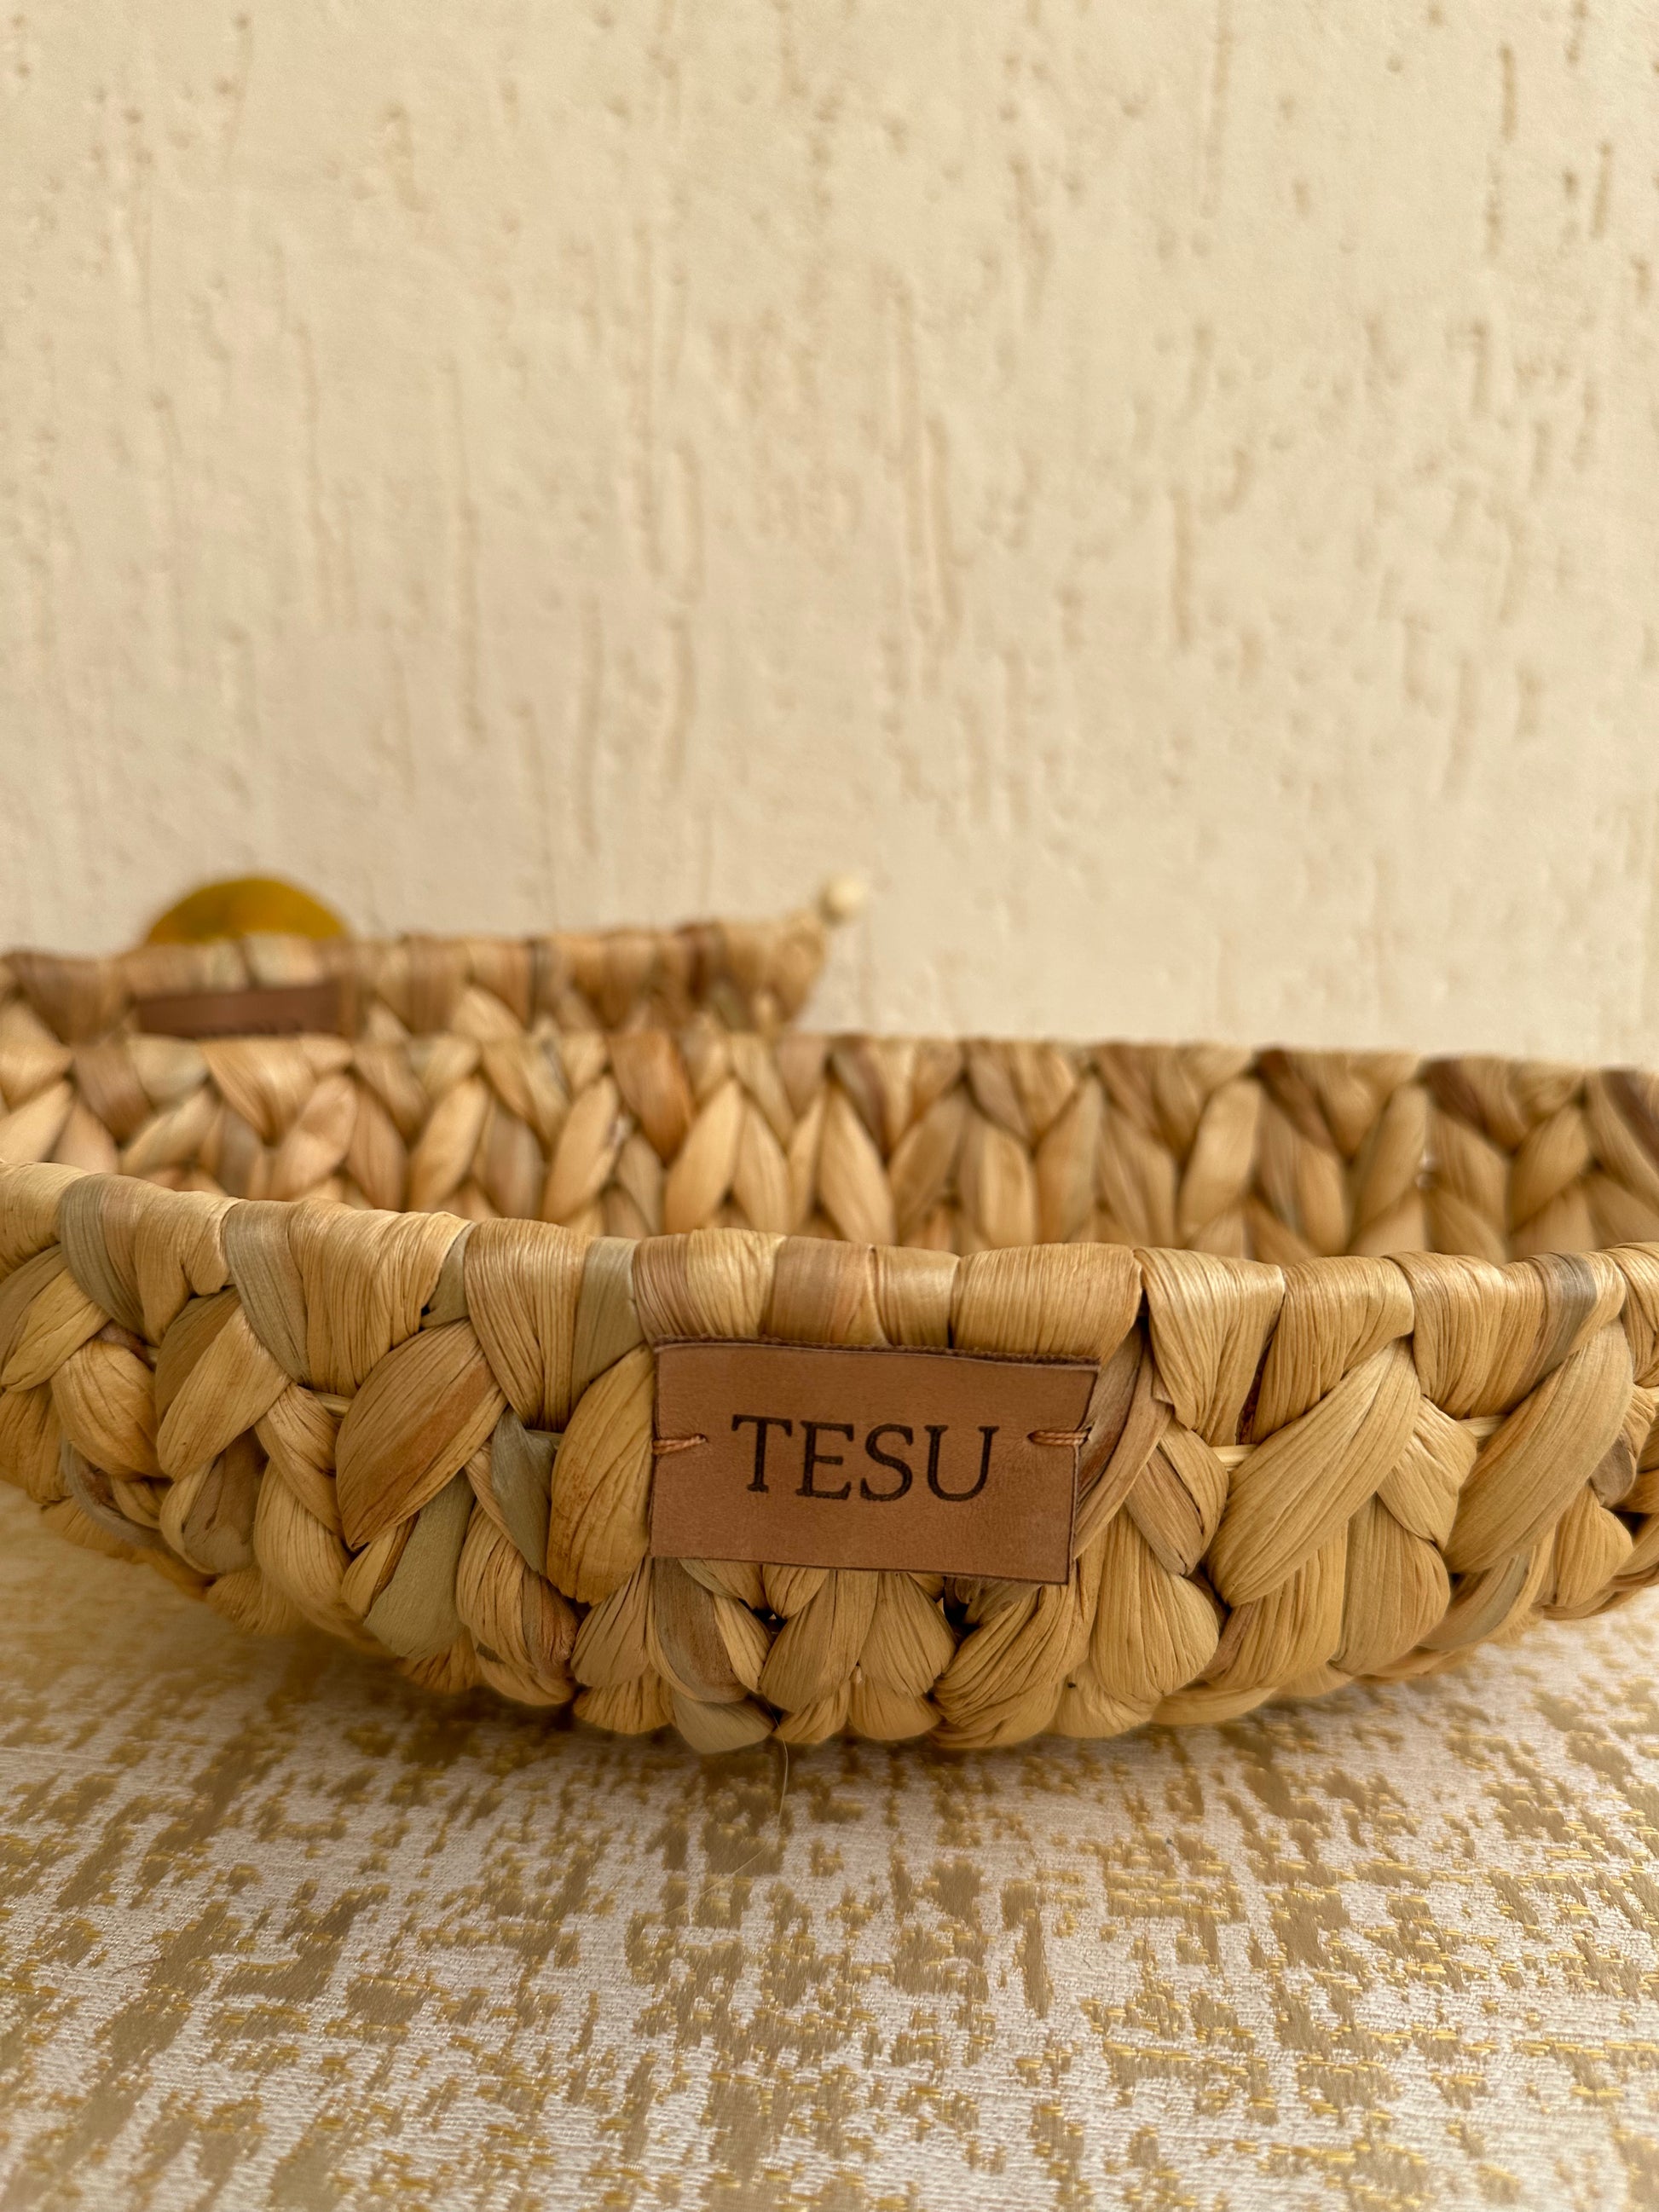 Water Hyacinth Baskets boast a unique natural texture and durability, making them ideal for various purposes. Their versatile nature allows them to be used as decorative home accents, stylish storage solutions. These baskets offer a charming blend of functionality, aesthetics, and sustainability, making them an excellent choice for individuals seeking eco-conscious and stylish home decor or storage options.